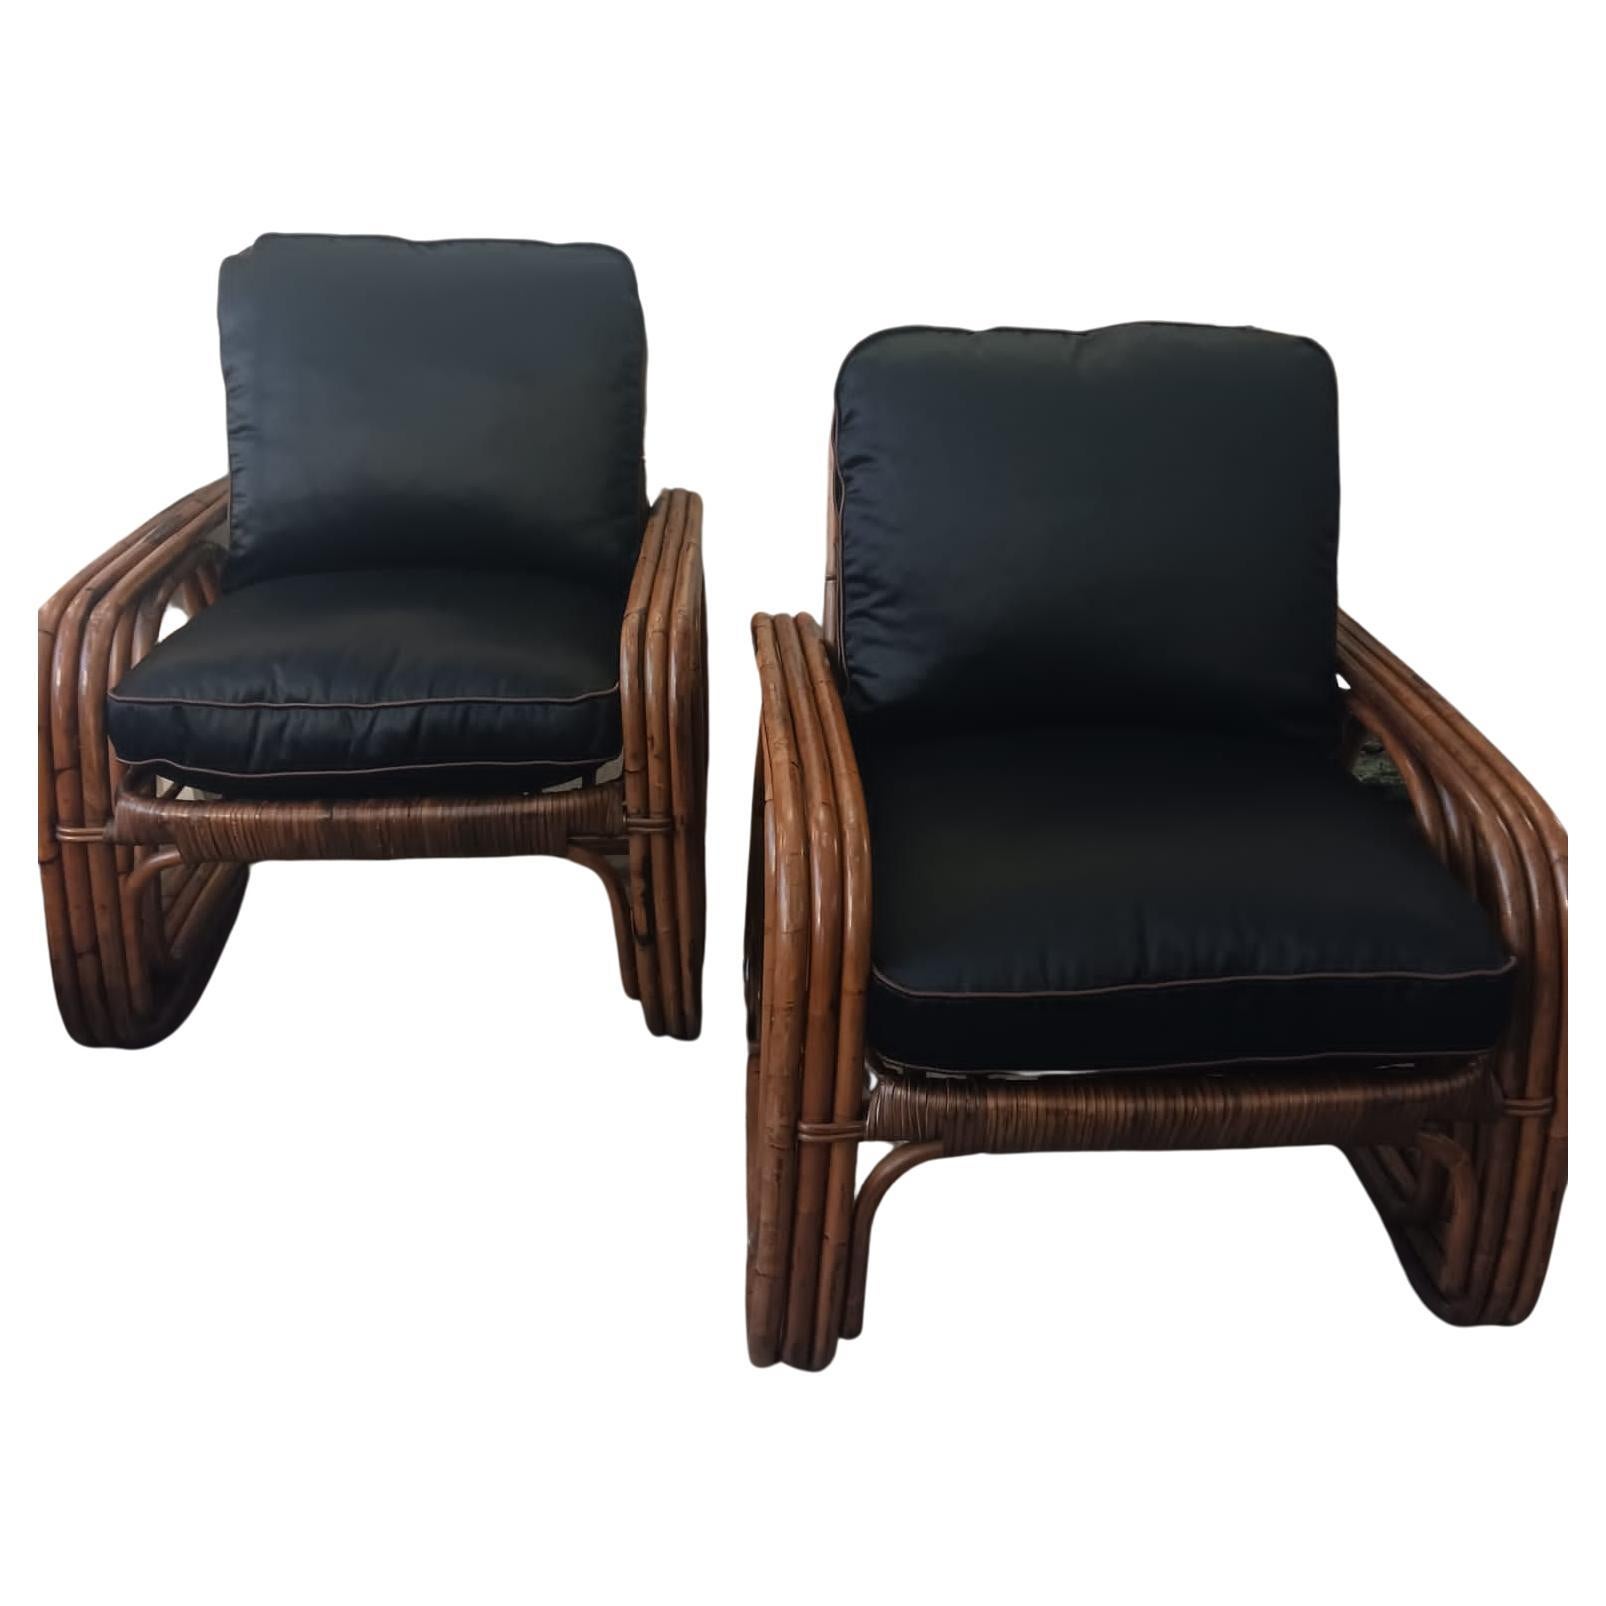 1950s Italy Bonacina Bamboo Armchairs Black and Bronze Cotton Upholstery For Sale